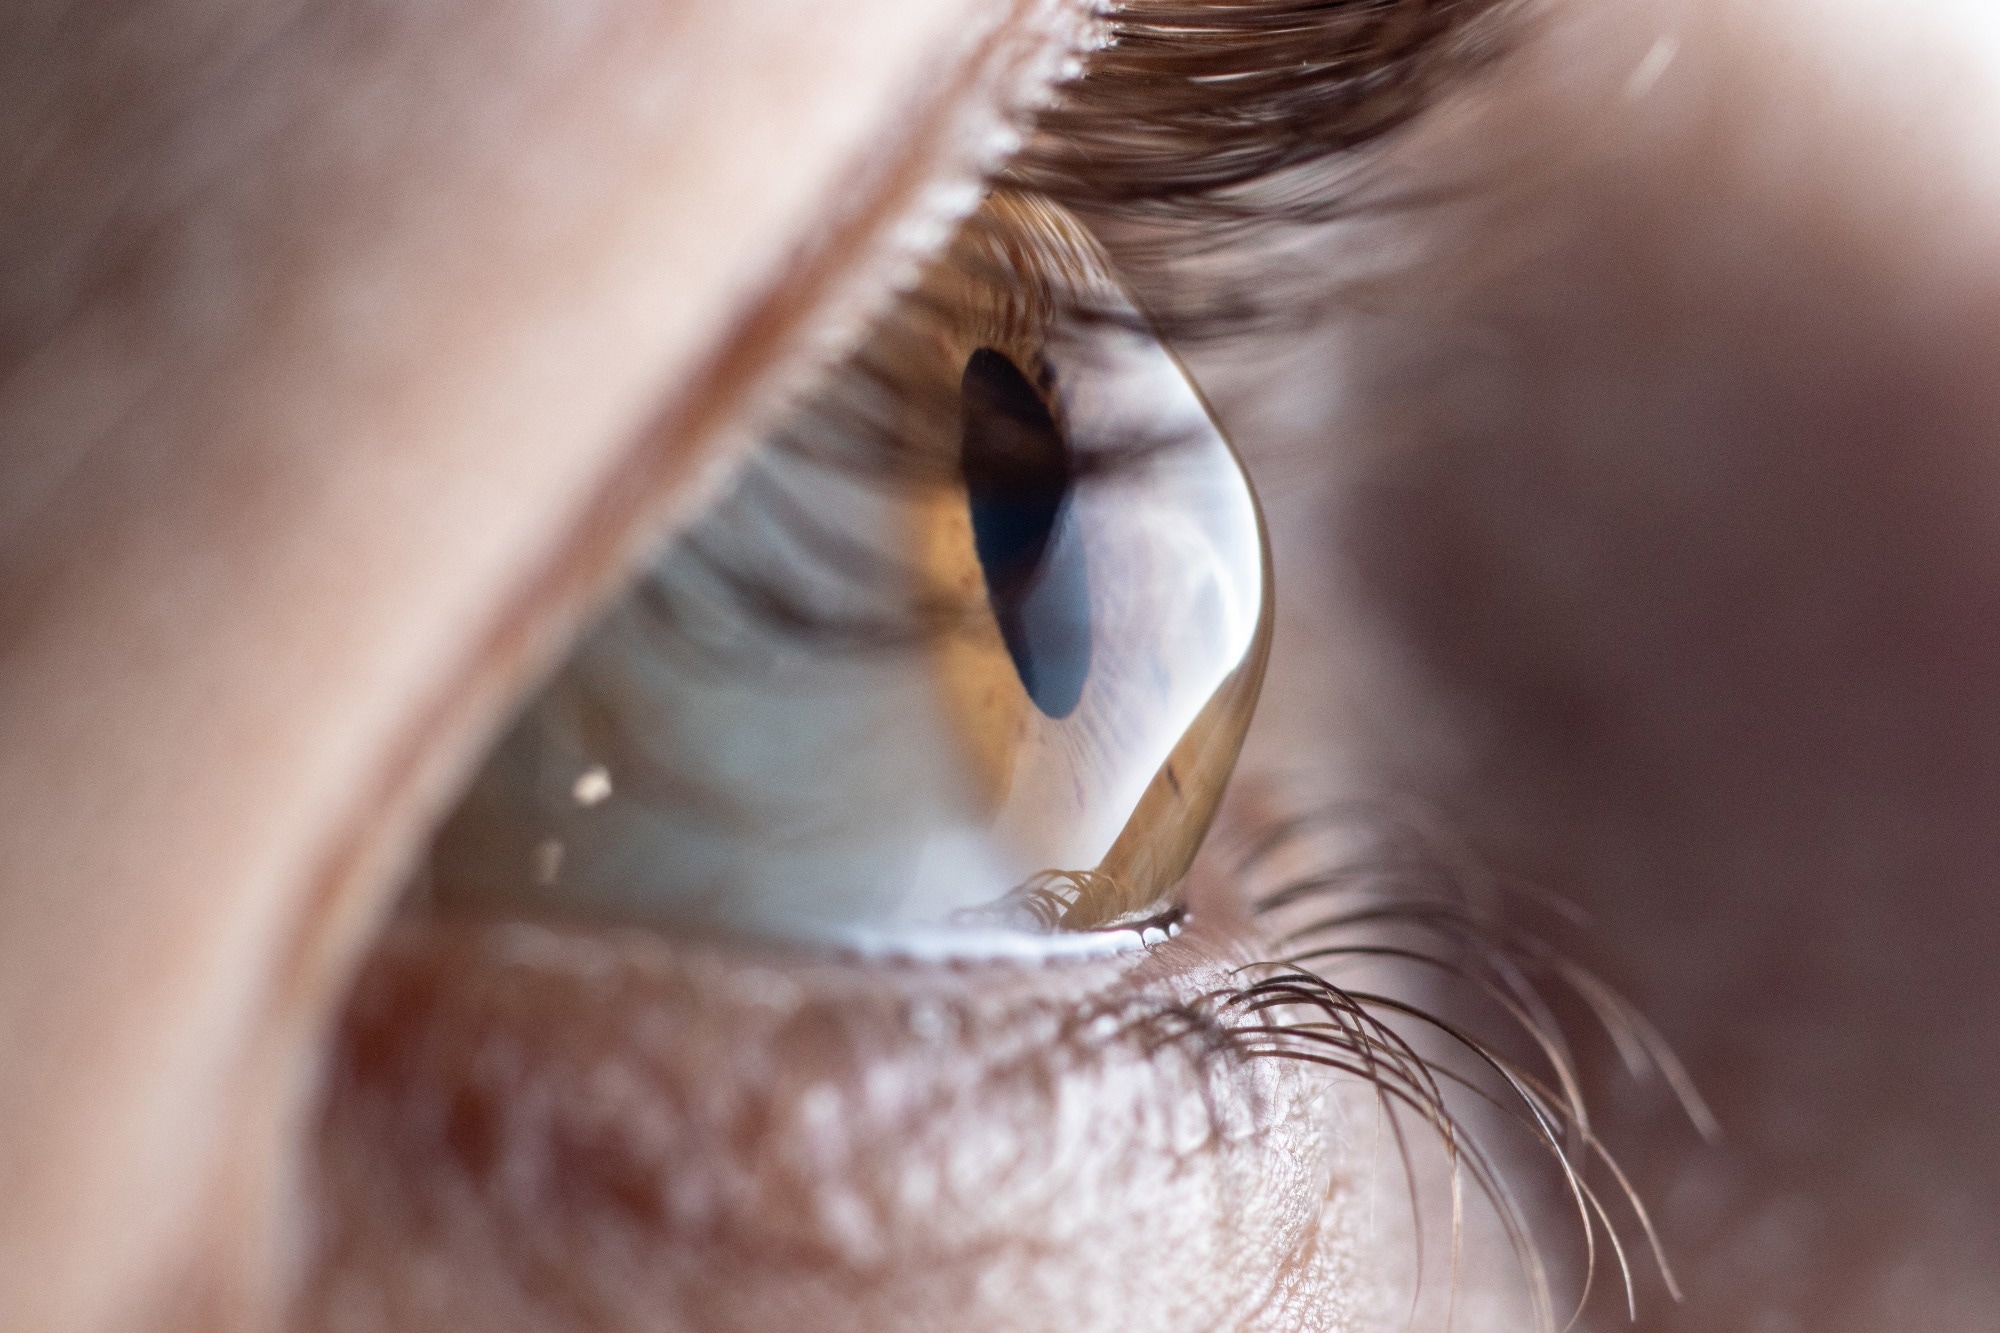 Study: Genome editing in the treatment of ocular diseases. Image Credit: GarnaZarina/Shutterstock.com